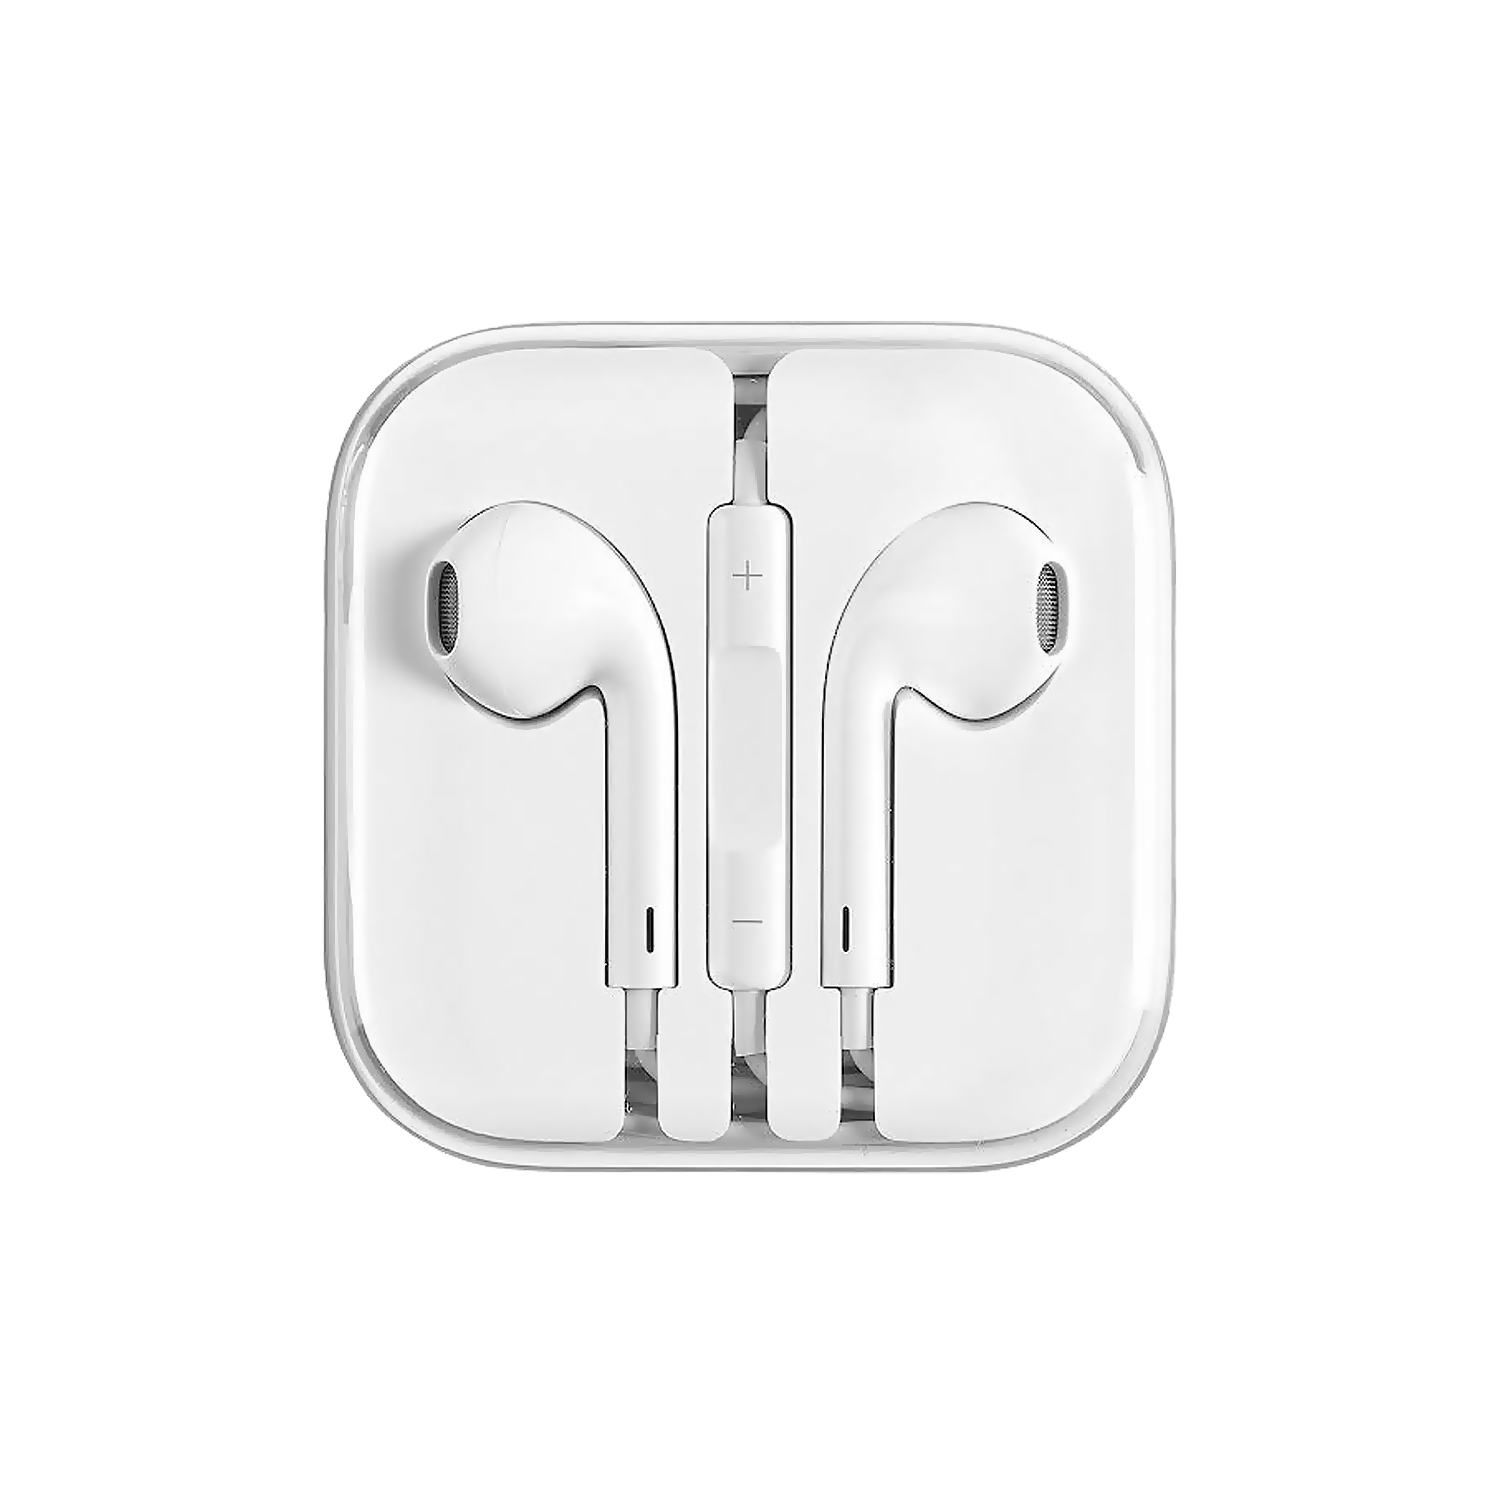 Earpods with lightning connector - iPhone 7 / 8 / X / Xr / Xs One Size White New - Sealed